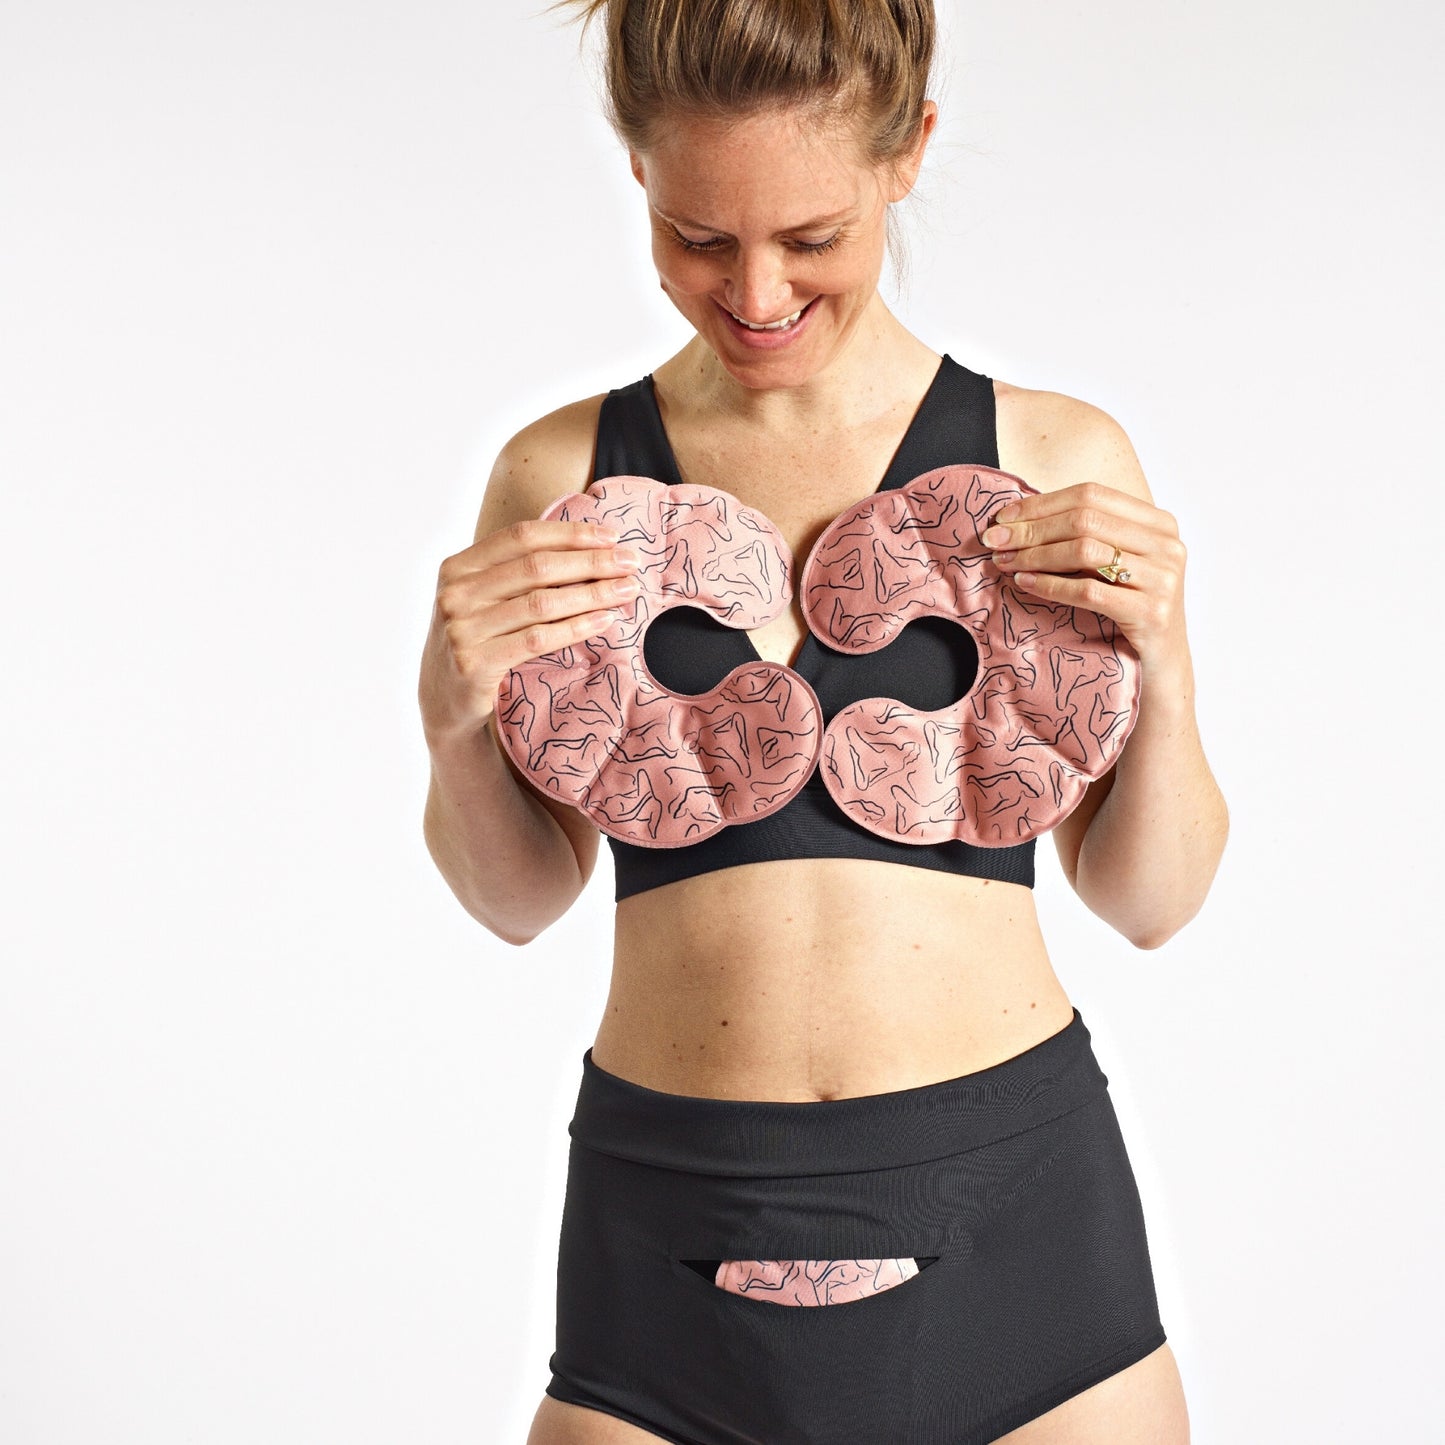 Woman holding Breast & Chest Reusable Ice/Heat Packs and wearing FourthWear